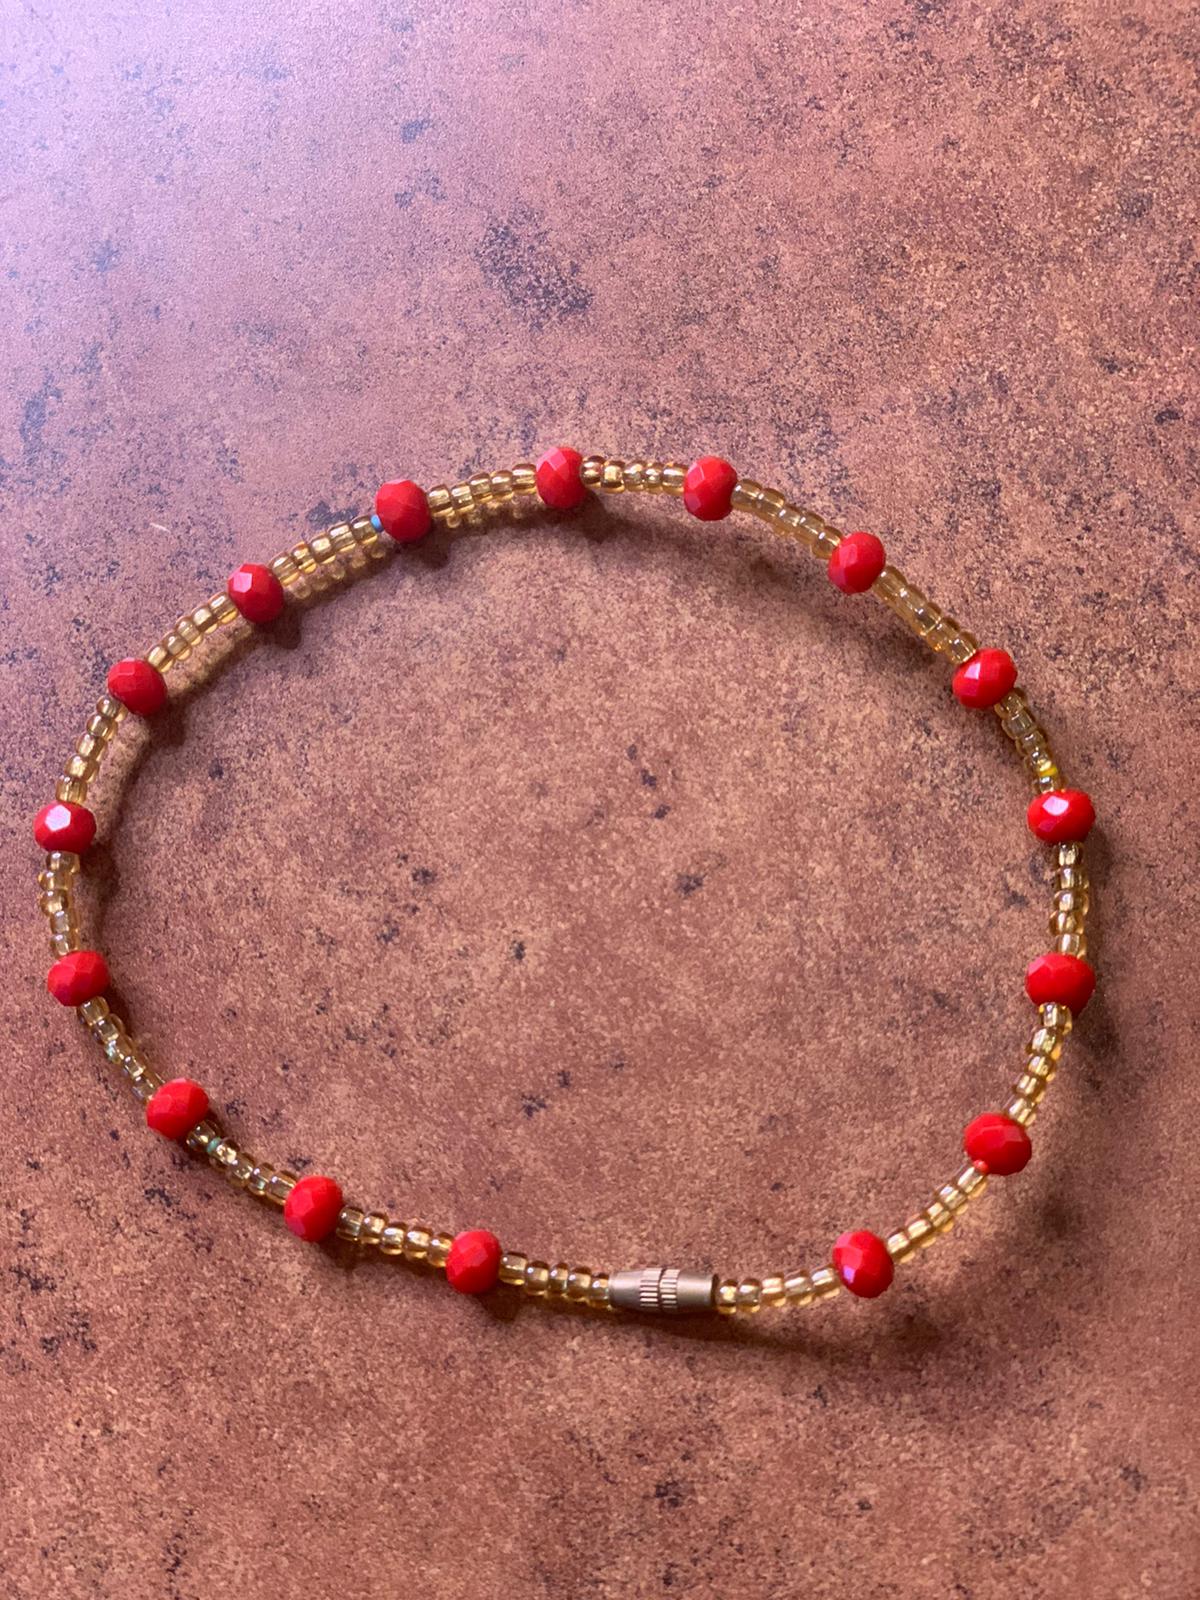 9 Inches Gold Glass Beads With Red Pebble Bar Removable Screw Anklet